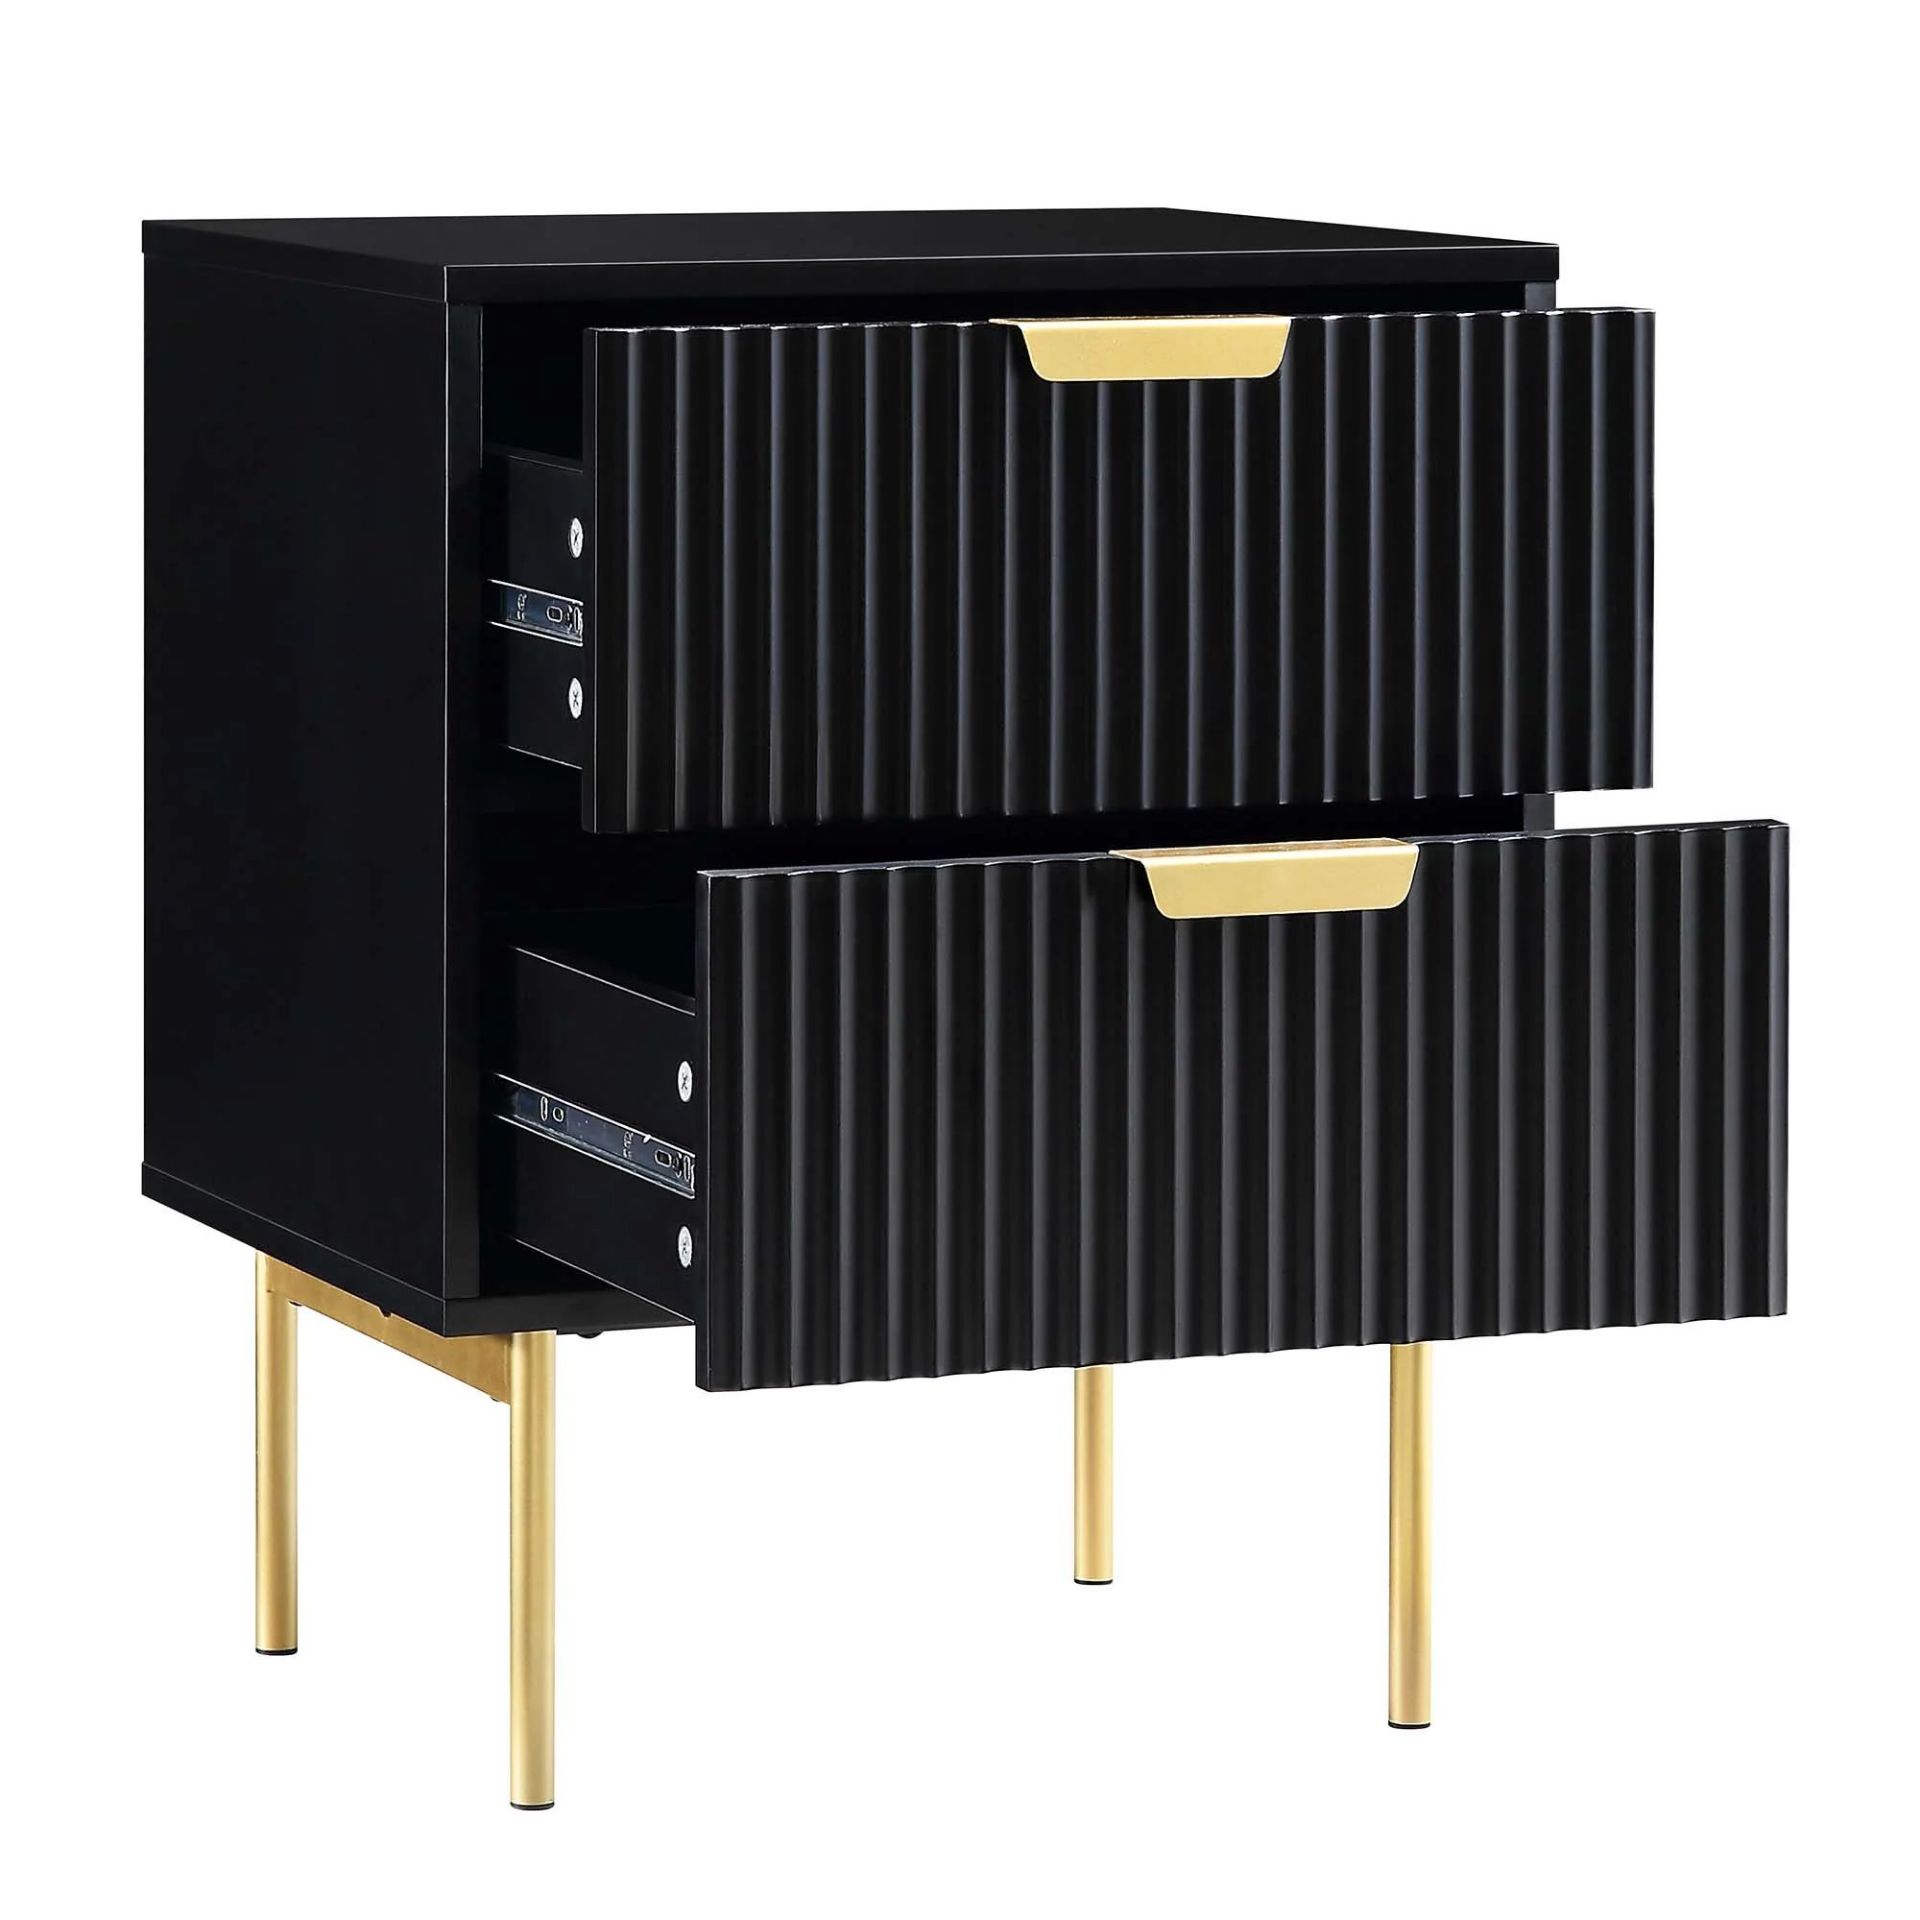 Richmond Ridged 2 Drawer Bedside Table, Matte Black. - R19.1. RRP £179.99. Our Richmond bedside - Image 2 of 2